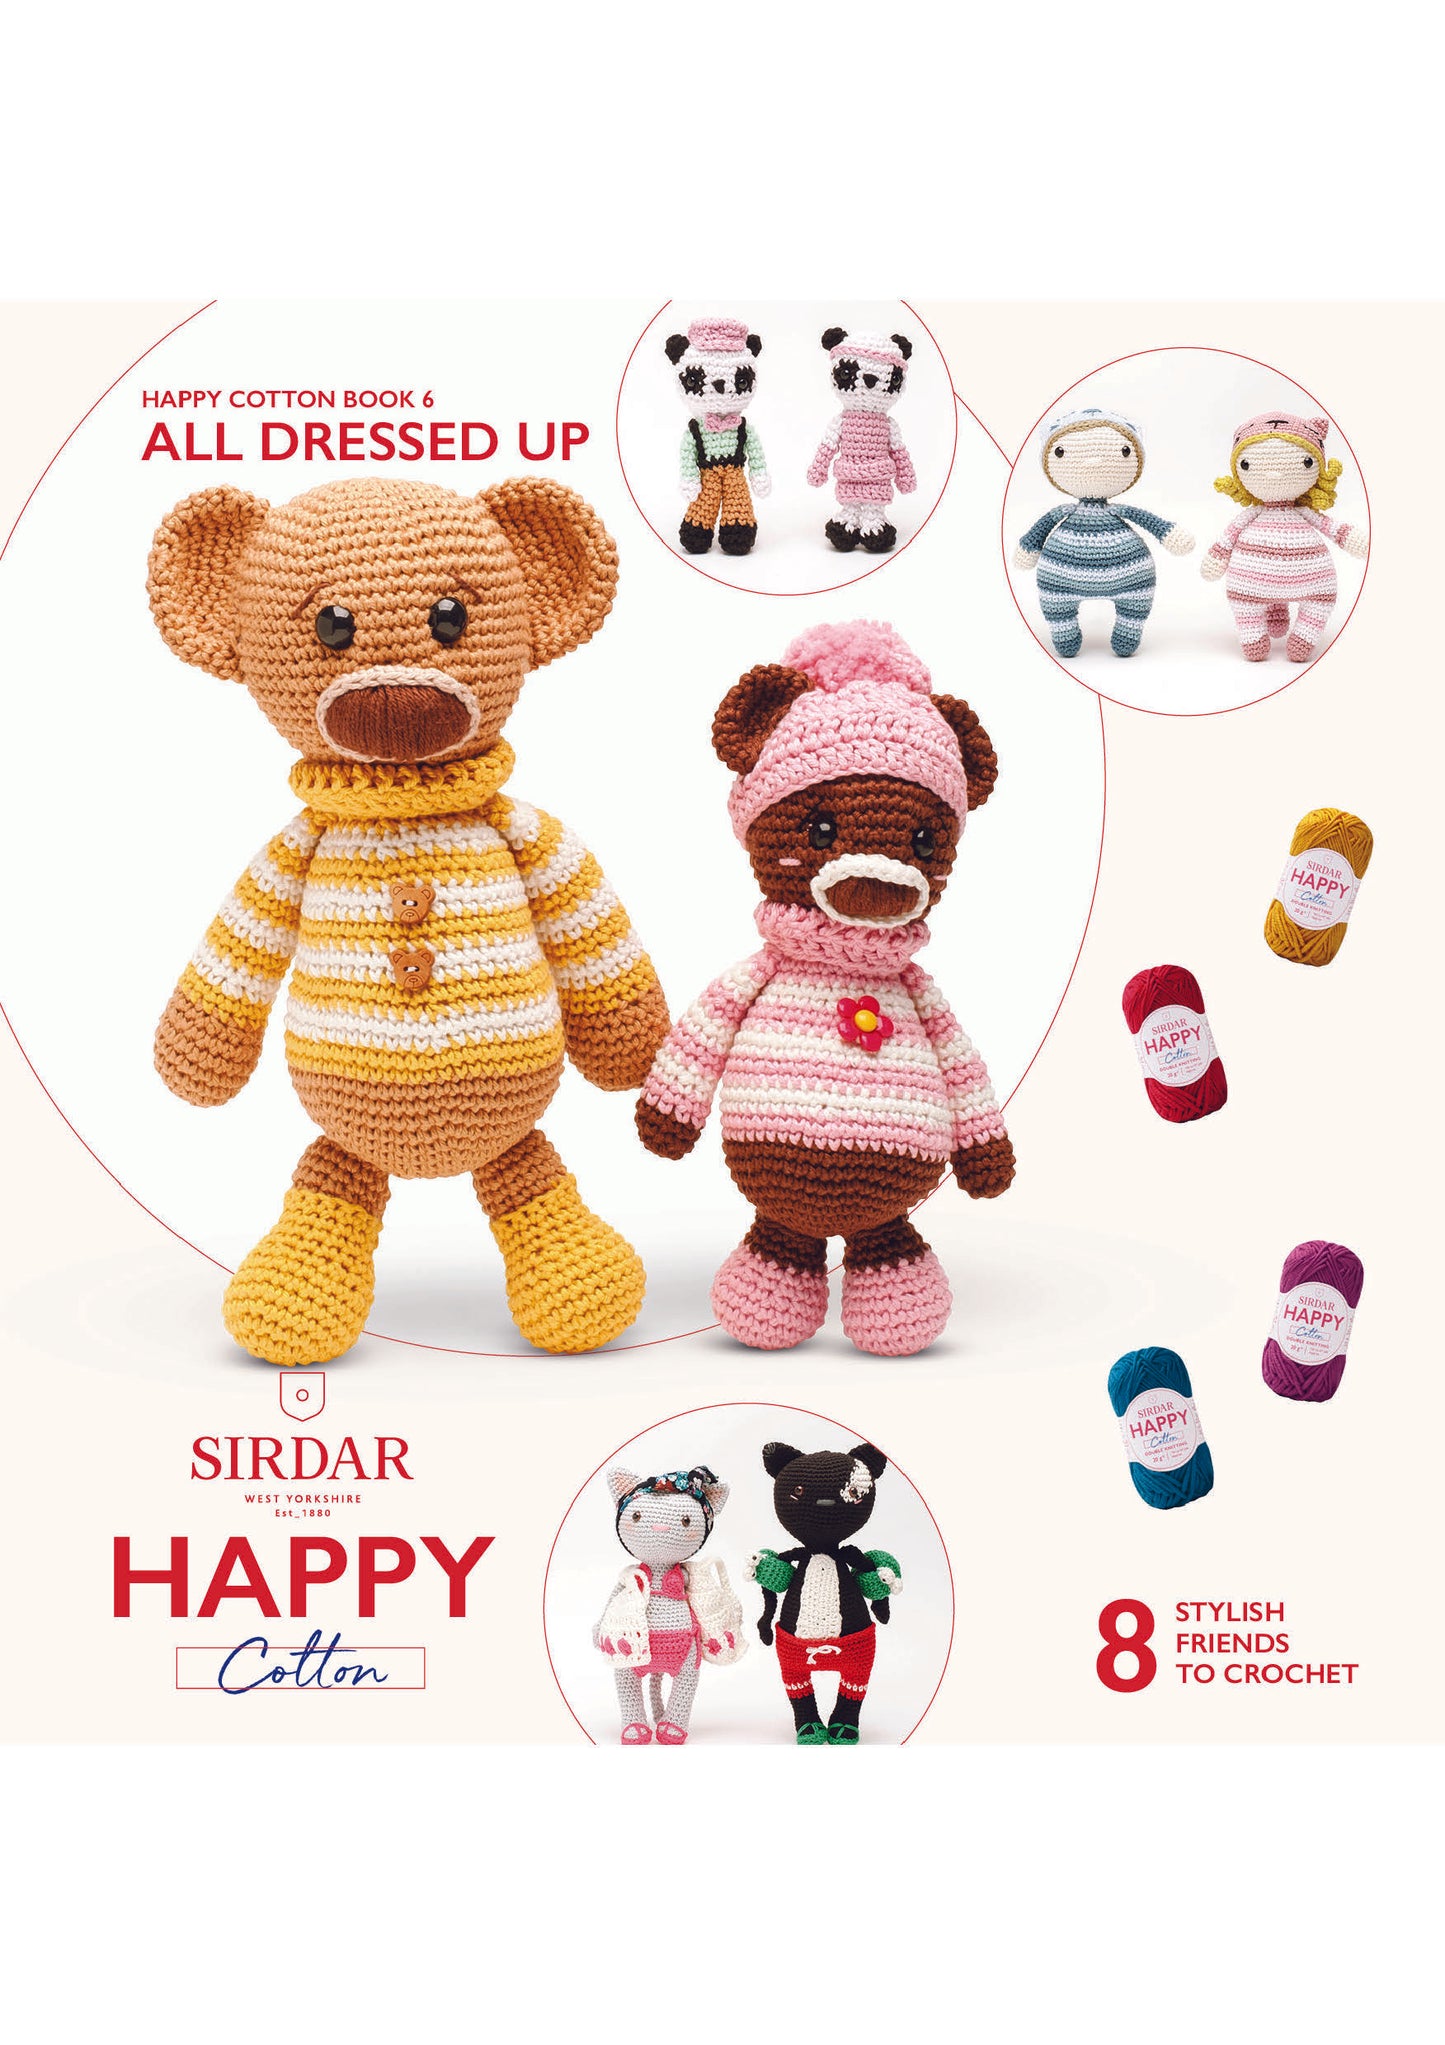 Sirdar Happy Cotton Book 6 - All Dressed Up